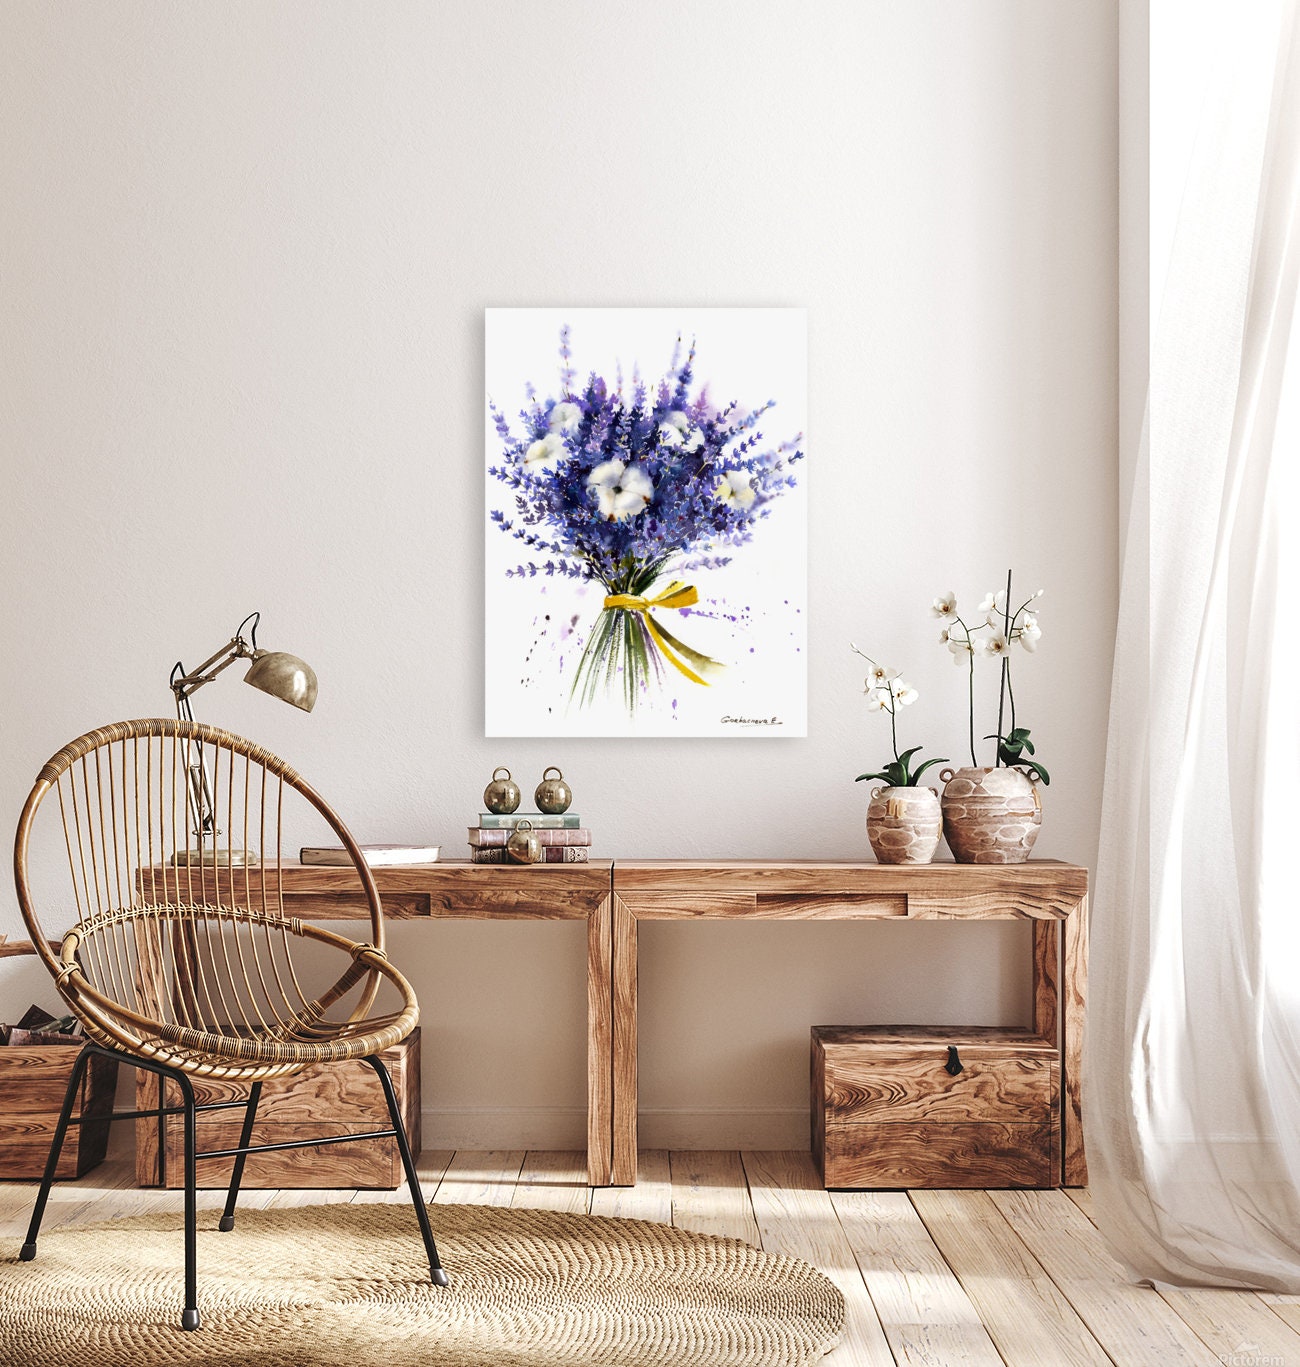 Lavender Bouquet Art Print, Botanical Wall Decor, French Purple Flower Painting, Flowers, Herb Print, Watercolor Wildflower